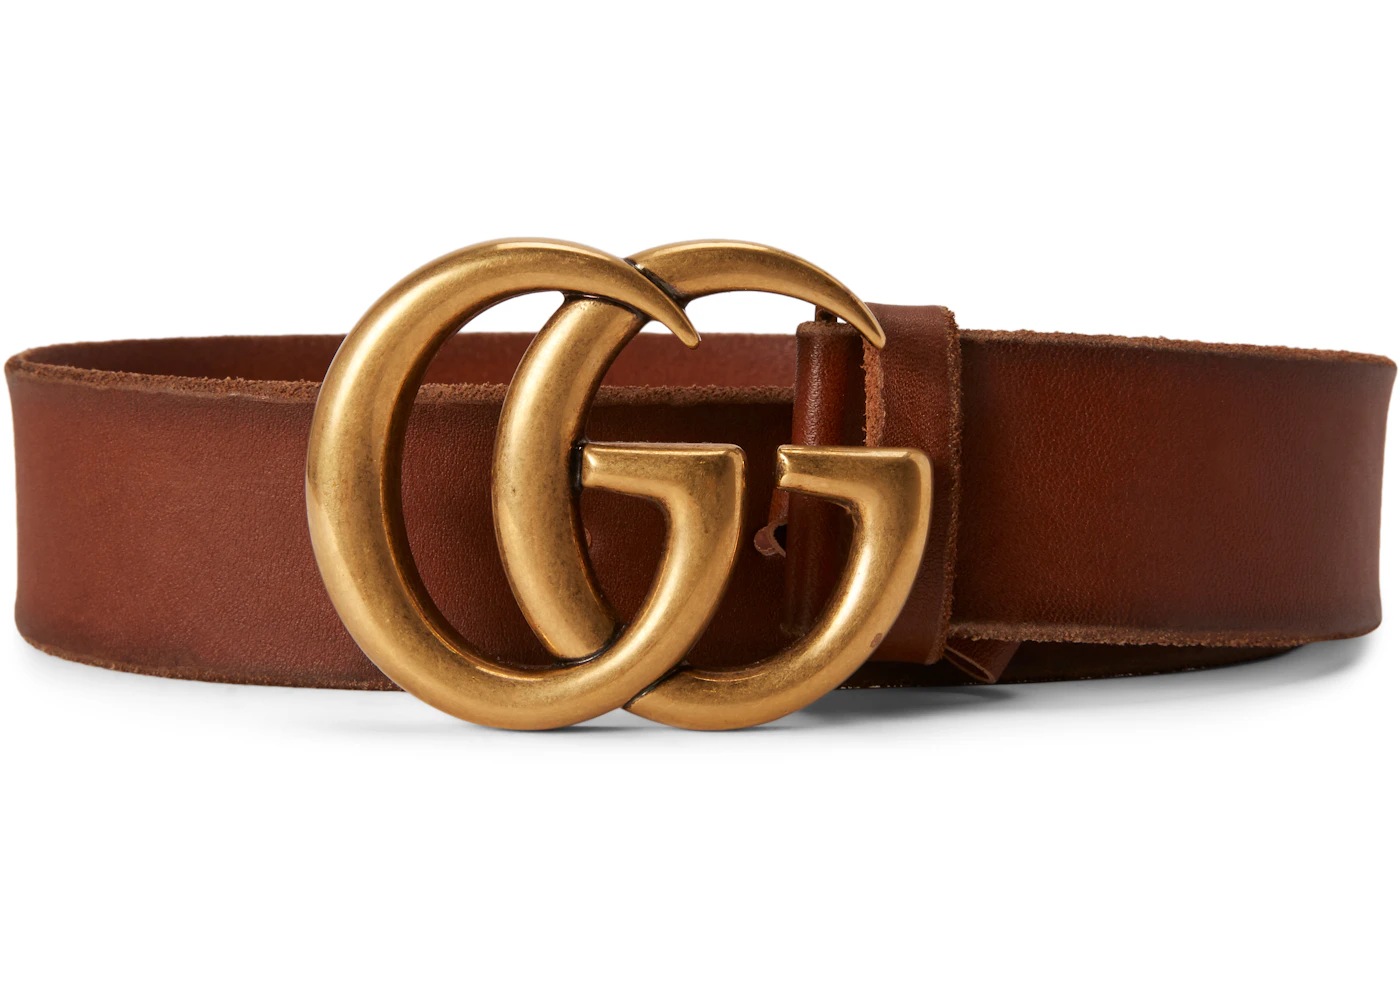 Gucci Double G Gold Buckle Leather Belt 1.5 Width Brown in Leather with ...